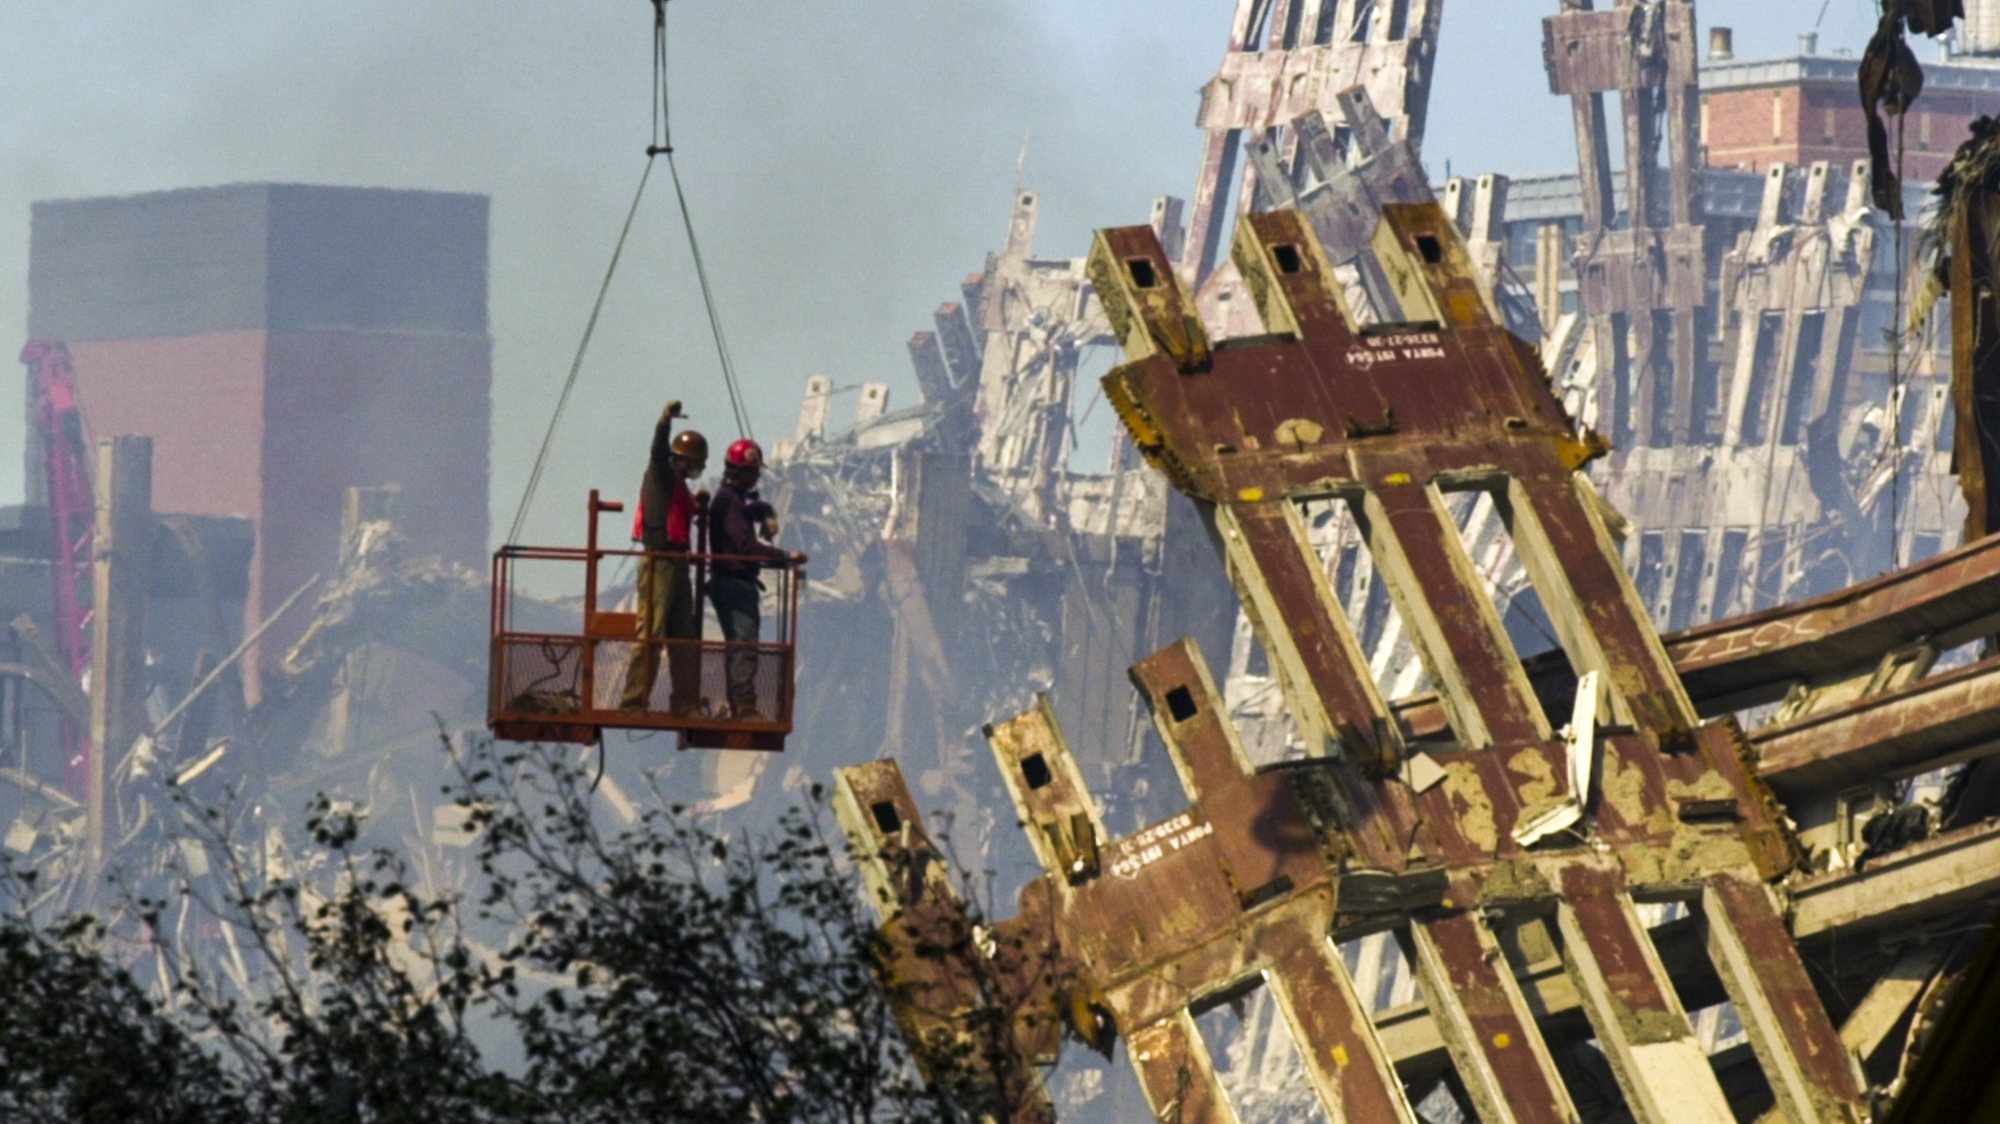 epa09444689 Workmen begin the task of dismantling the destroyed remains of the 7 World Trade Center building in New York, New York, USA on 17 September 2001 (reissued 03 September 2021). On 11 September 2001, during a series of coordinated terror attacks using hijacked airplanes, two airplanes were flown into the World Trade Center&#039;s twin towers causing the collapse of both towers. A third plane targeted the Pentagon and a fourth plane heading towards Washington, DC ultimately crashed into a field. The 20th anniversary of the worst terrorist attack on US soil will be observed on 11 September 2021.  EPA/TANNEN MAURY *** Local Caption *** 53010287